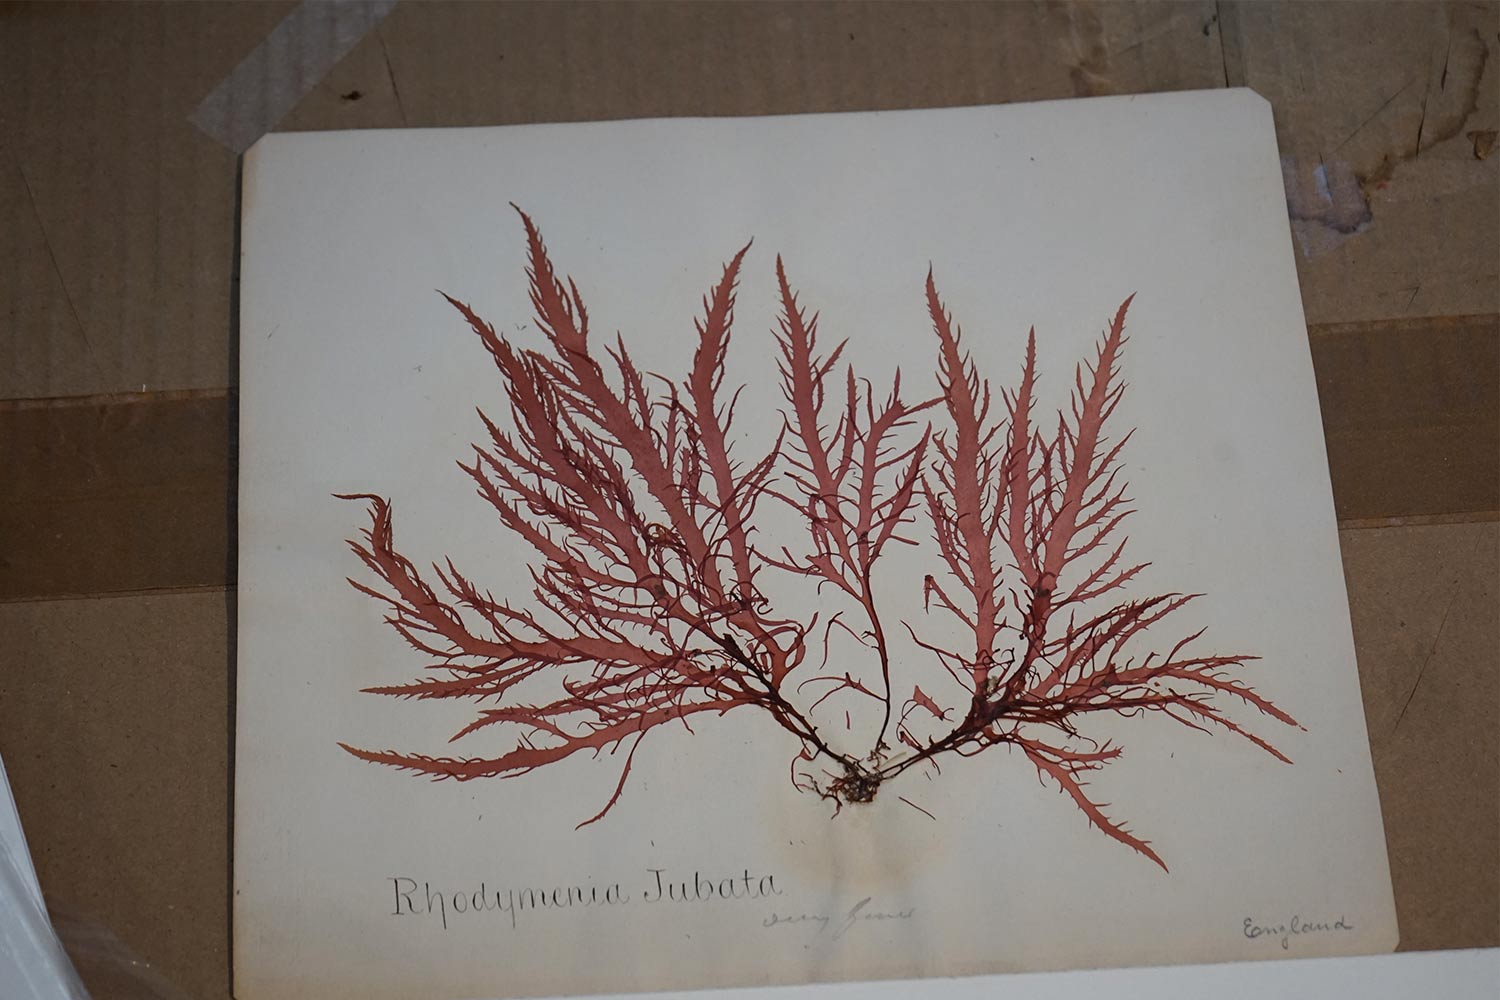 Photograph of a algae species dried sample over a painting